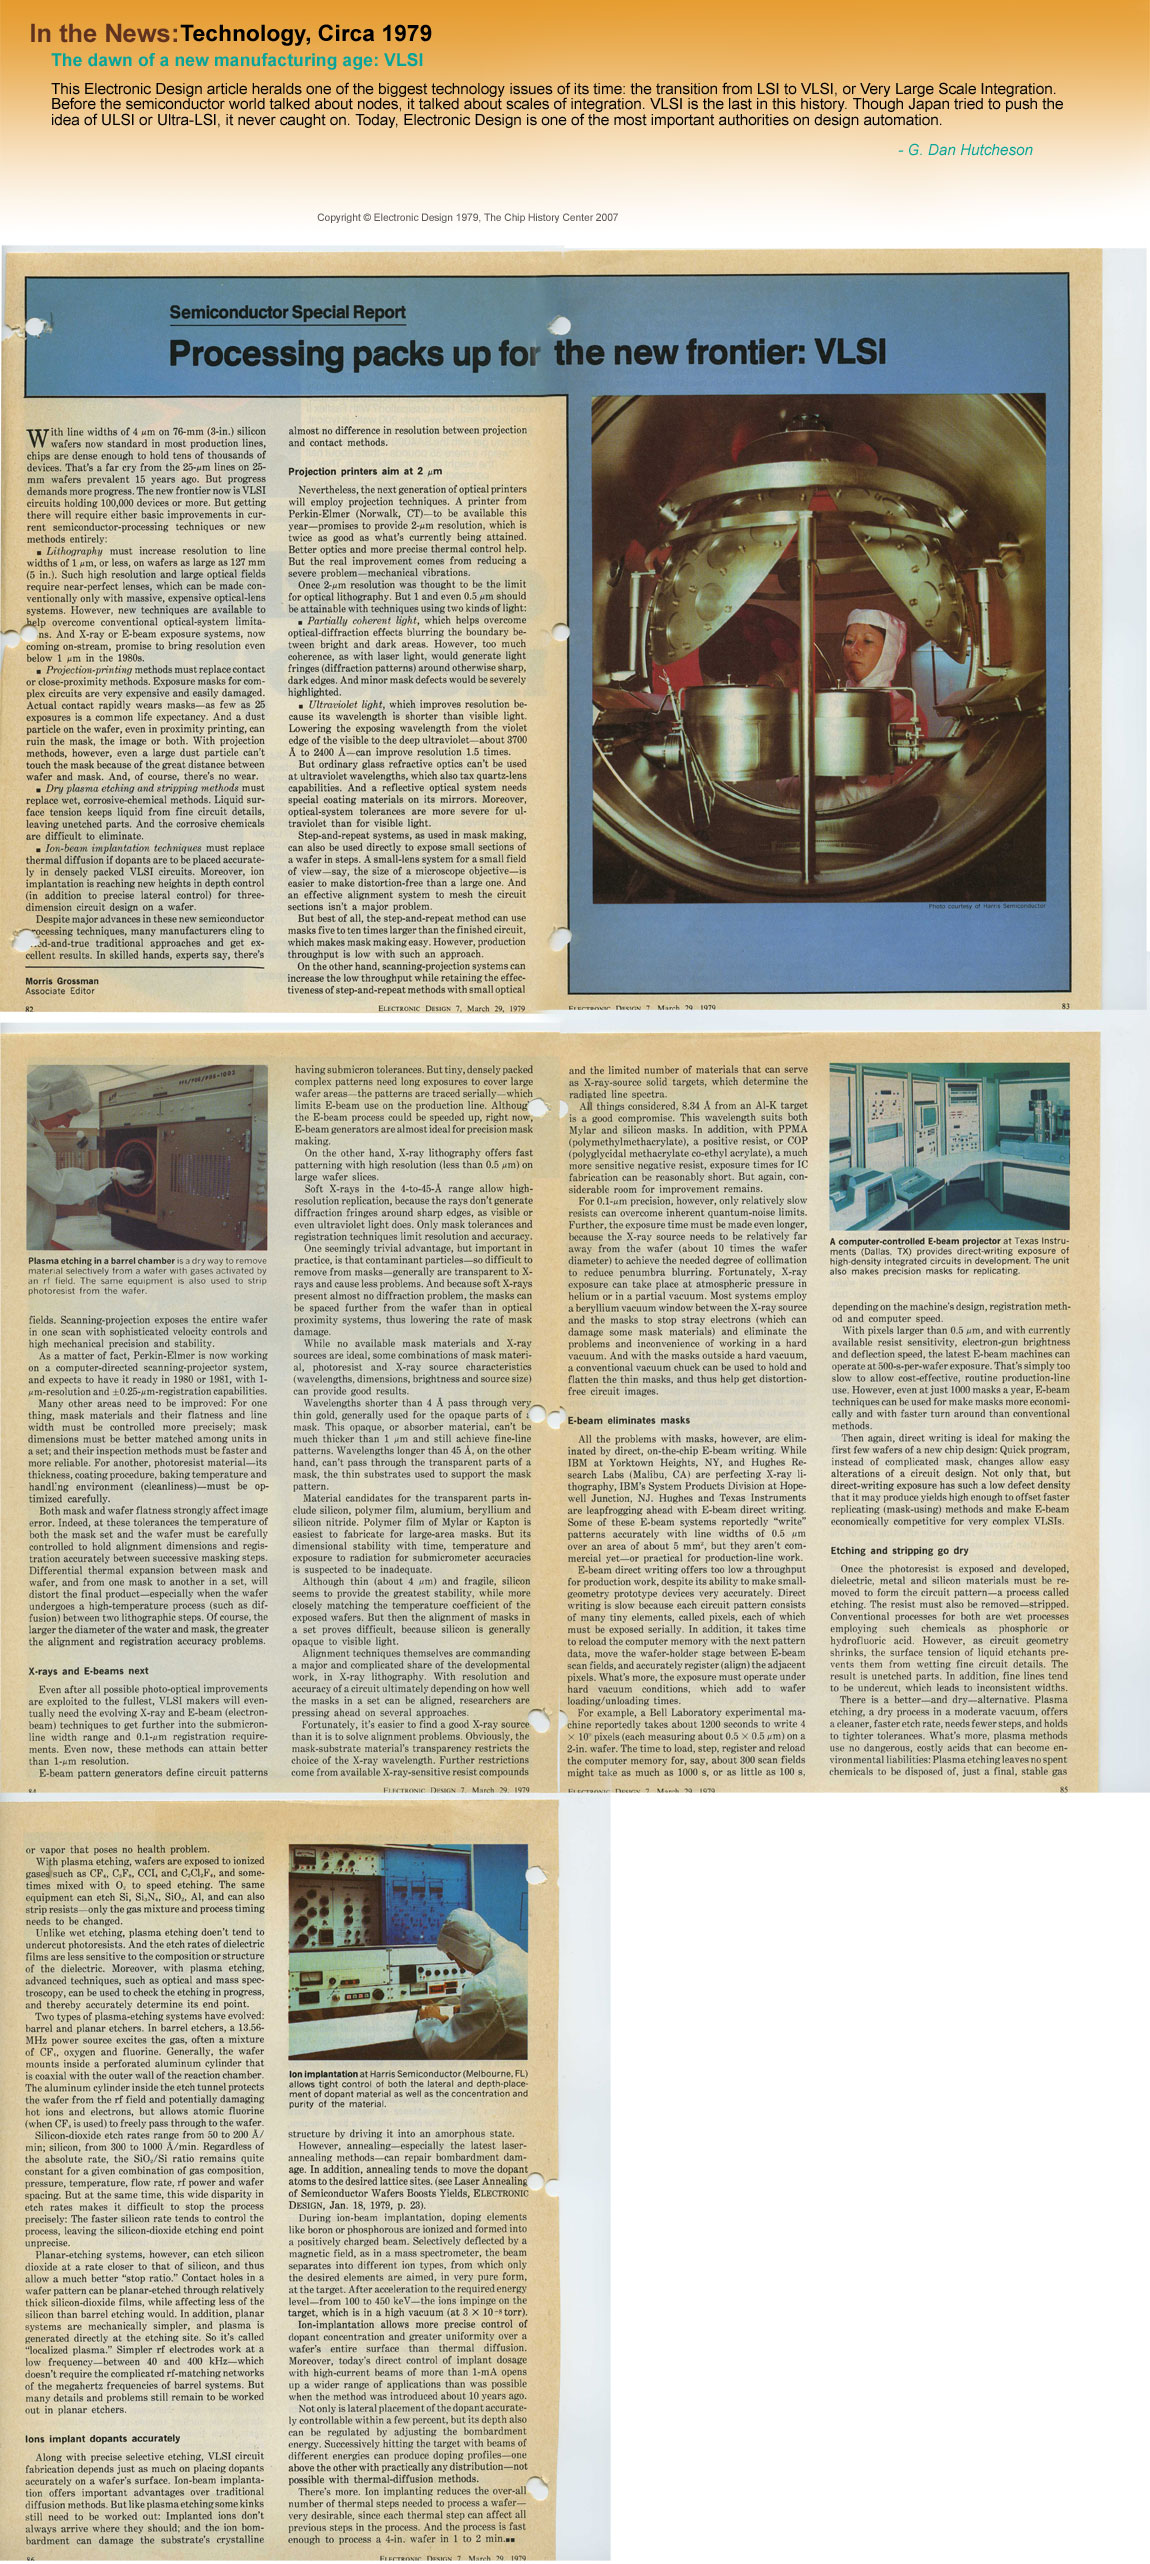 In the New: Technology, Circa 1979 - The dawn of a new manufacturing age: VLSI